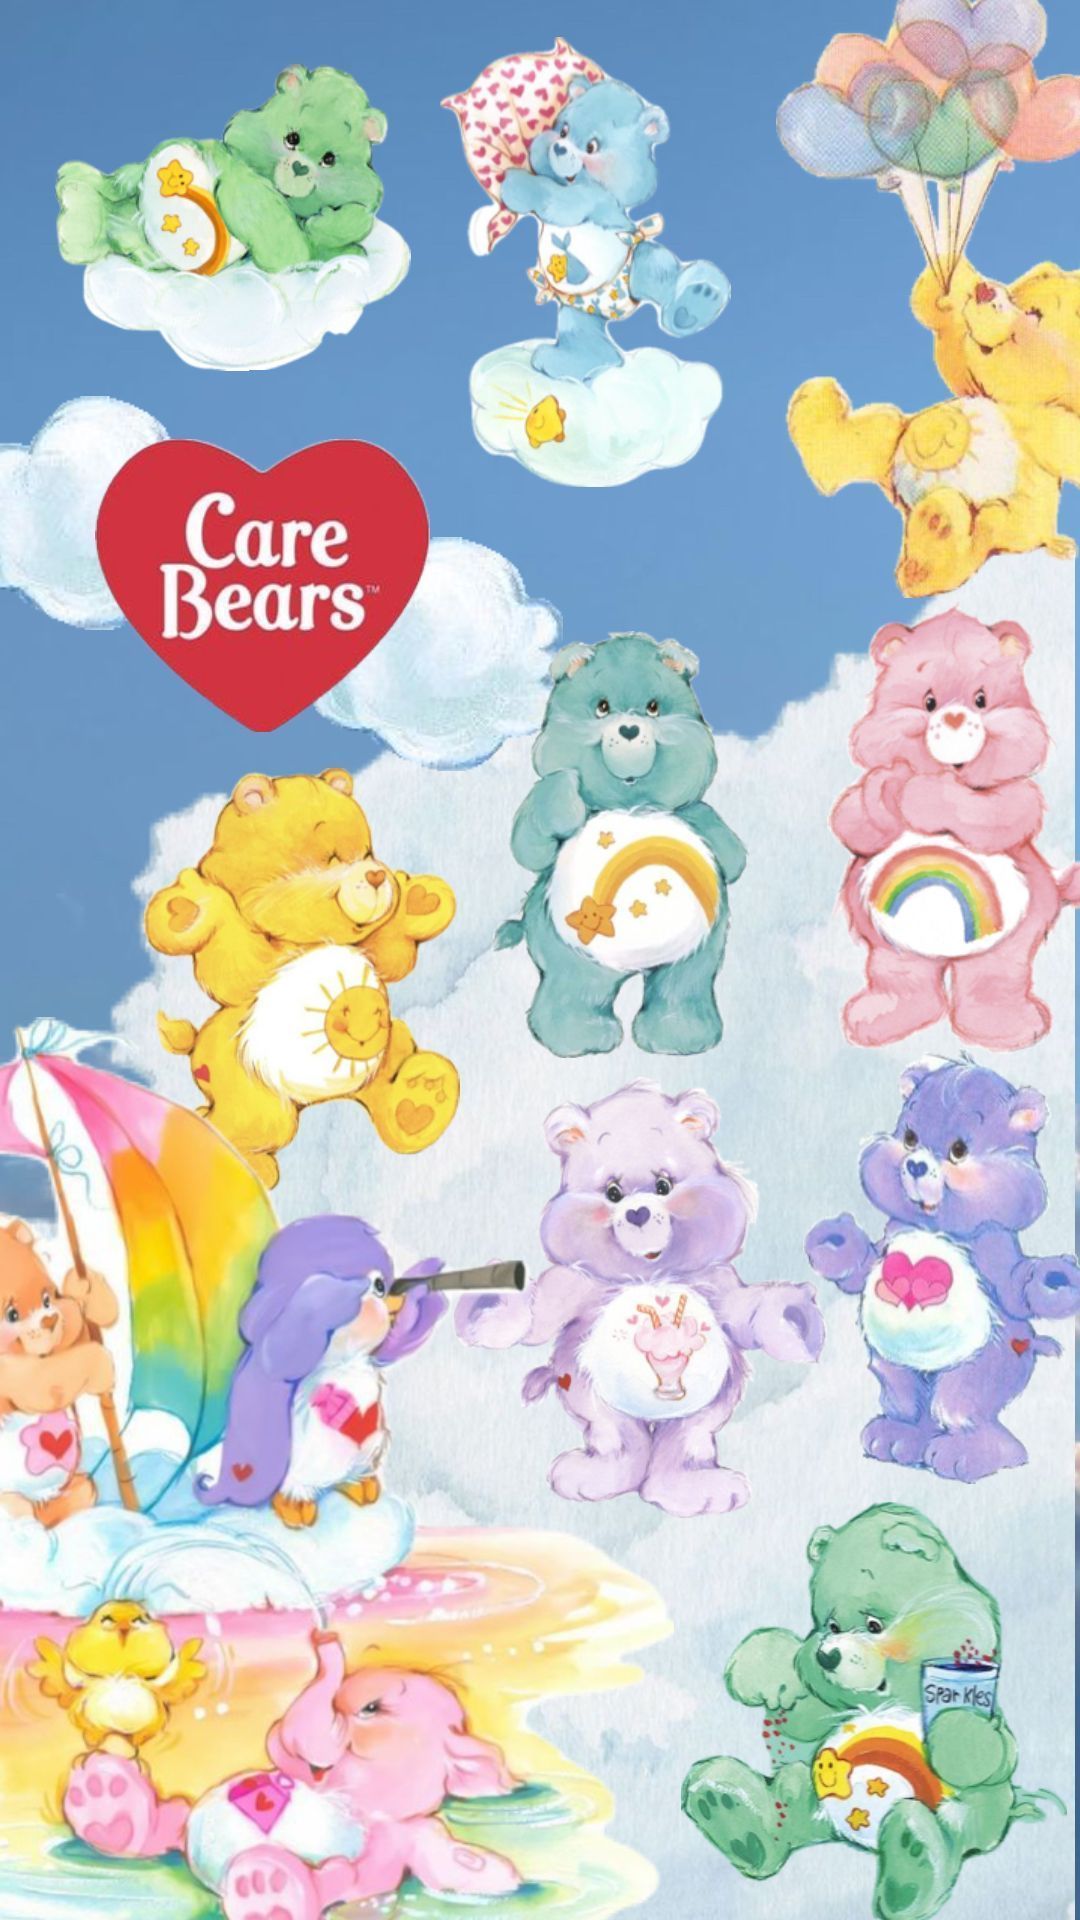 Care Bears iPhone Wallpaper with high-resolution 1080x1920 pixel. You can use this wallpaper for your iPhone 5, 6, 7, 8, X, XS, XR backgrounds, Mobile Screensaver, or iPad Lock Screen - Care Bears